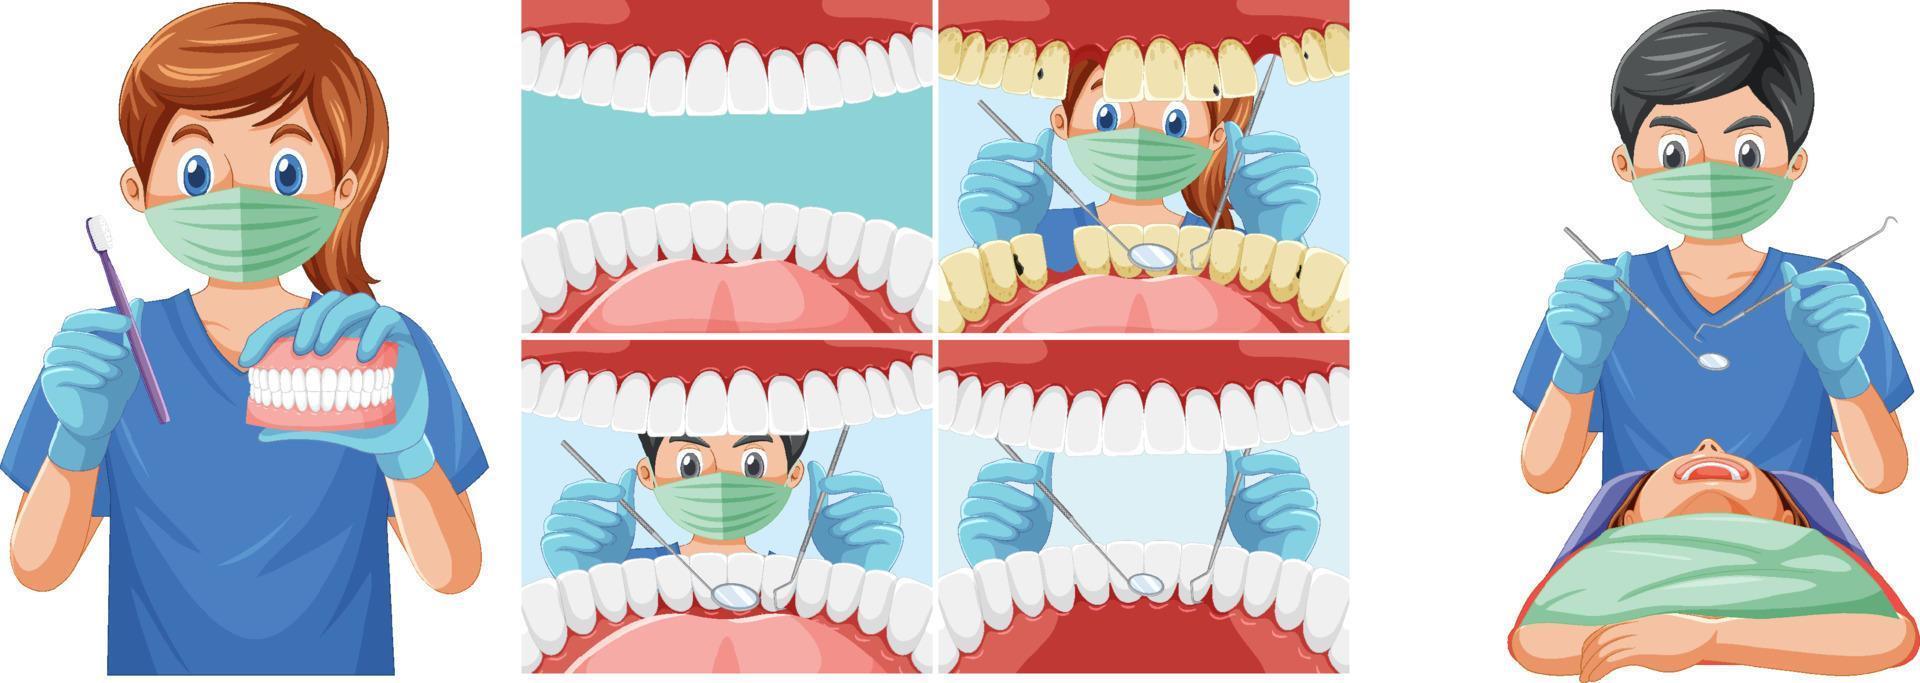 Set of dentist holding instruments examining patient teeth inside human mouth vector